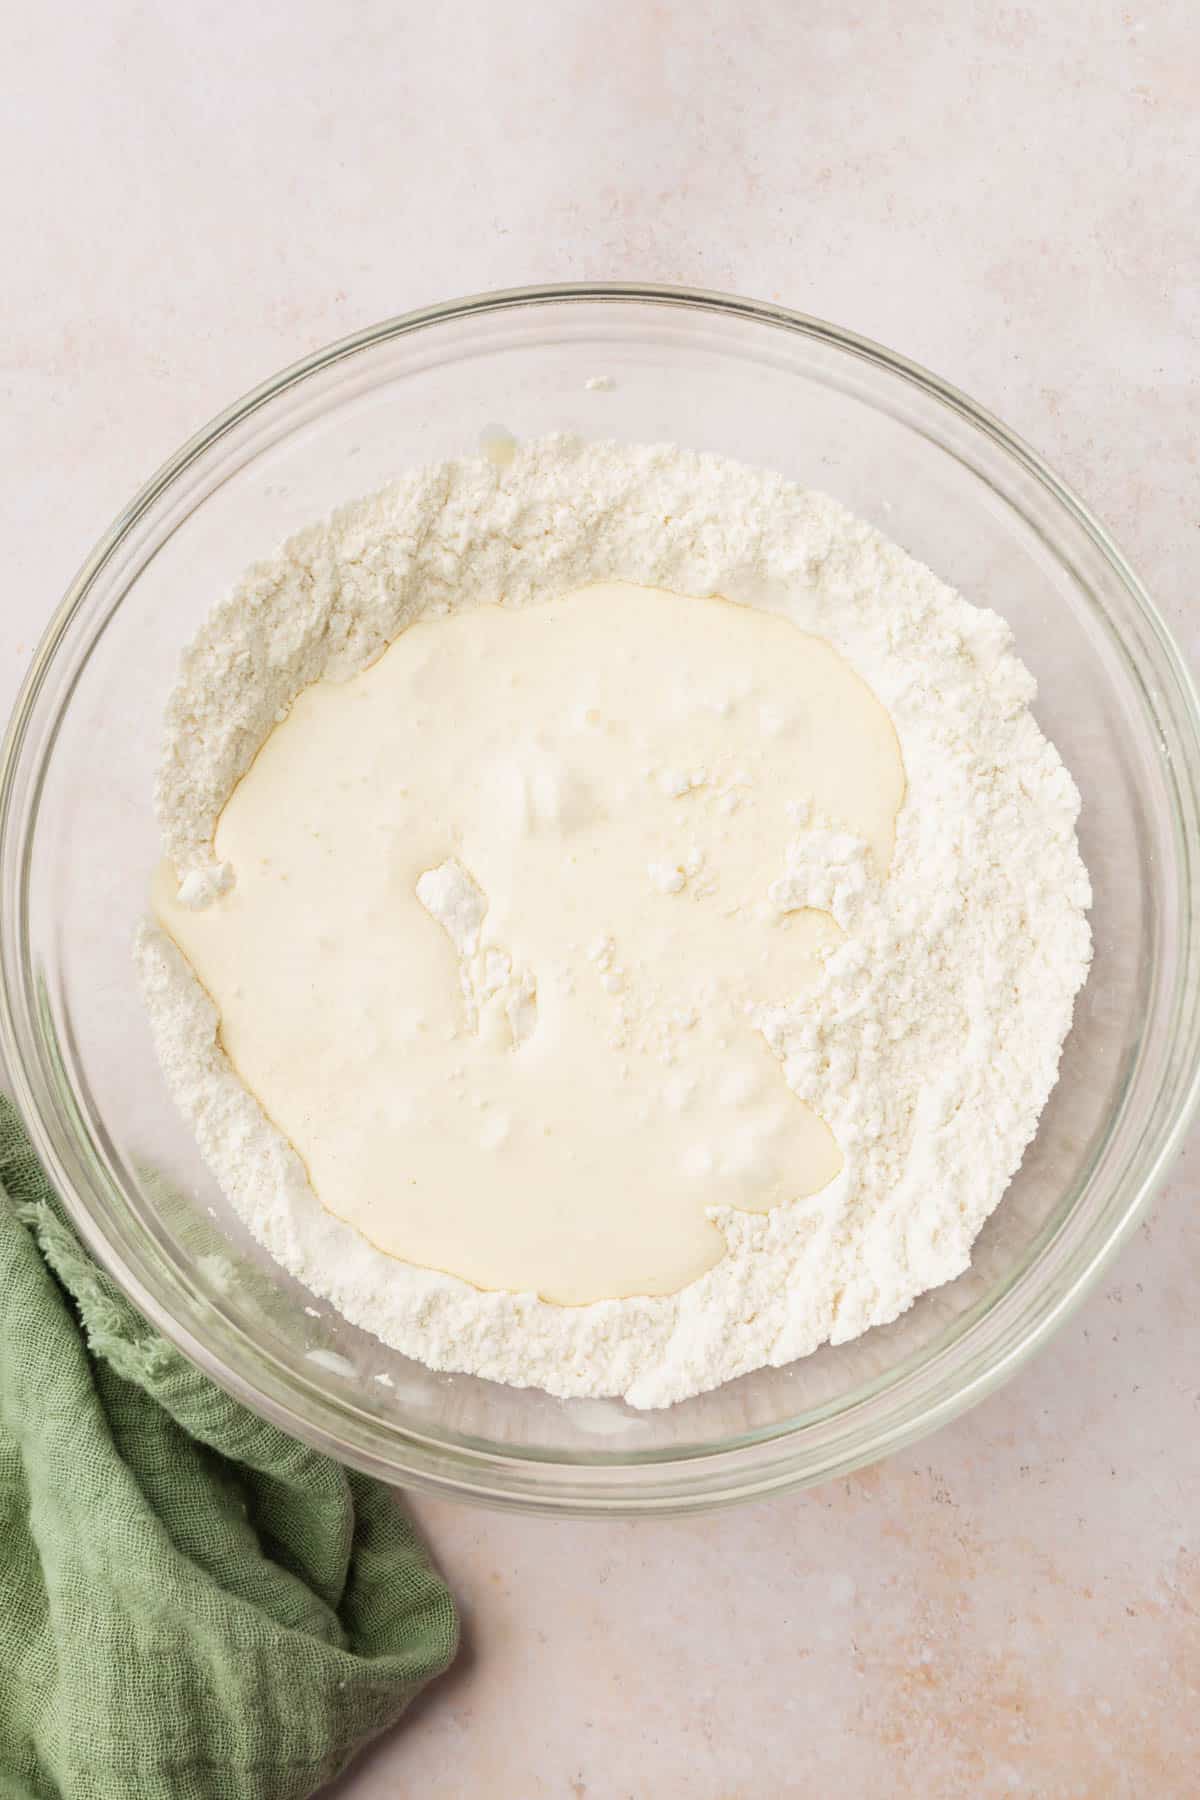 A glass mixing bowl with gluten-free flour blend and heavy cream unmixed.